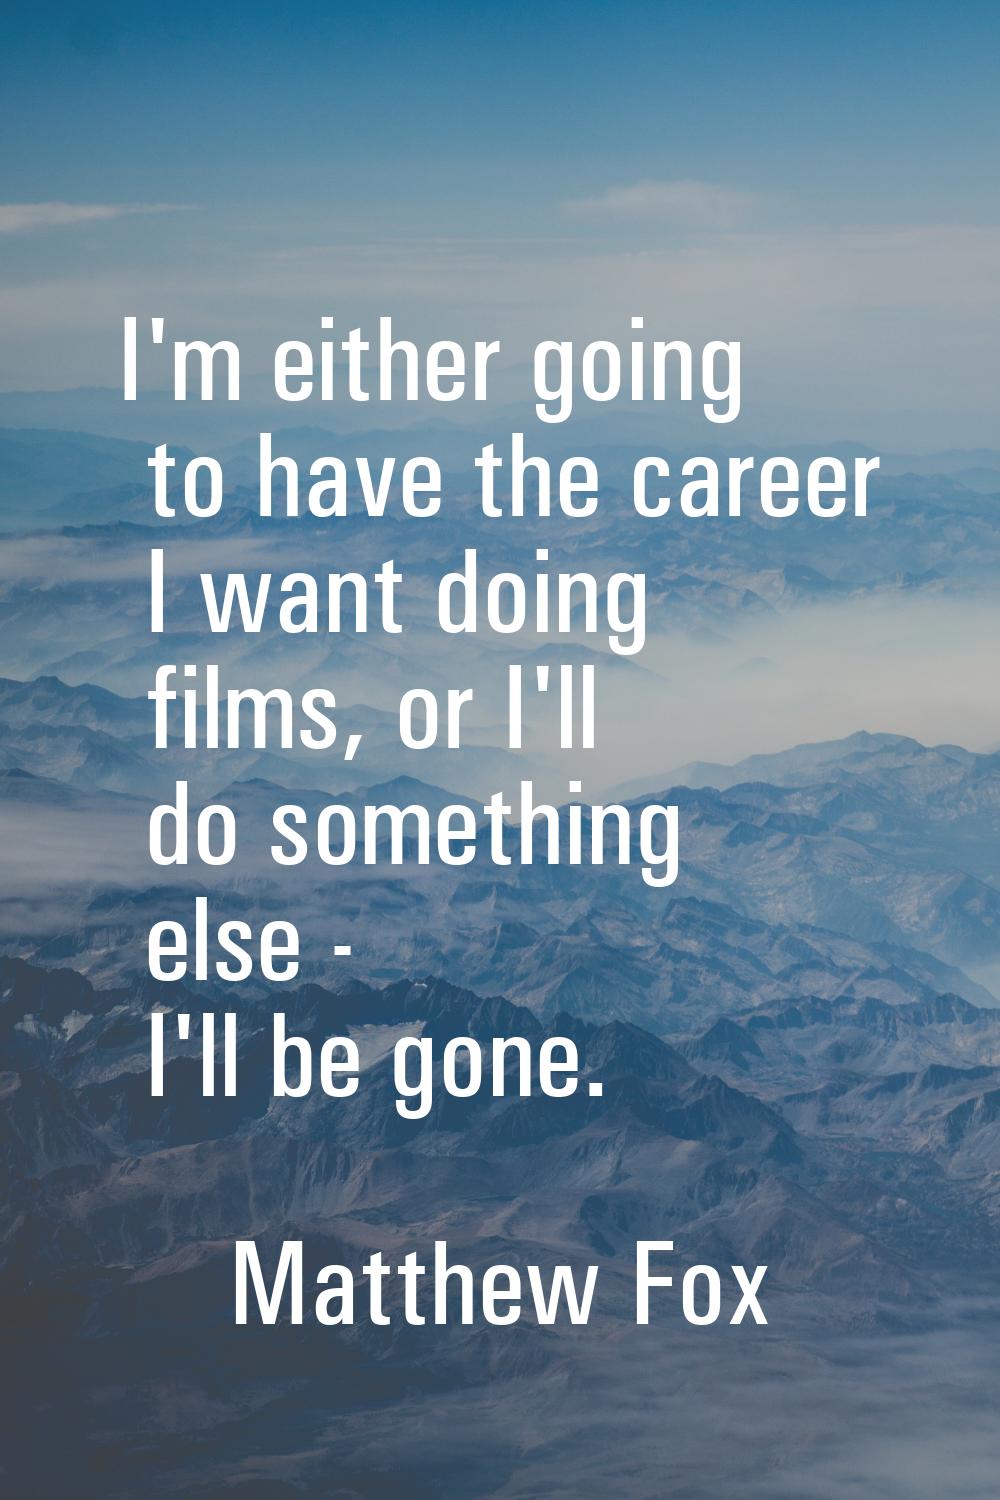 I'm either going to have the career I want doing films, or I'll do something else - I'll be gone.